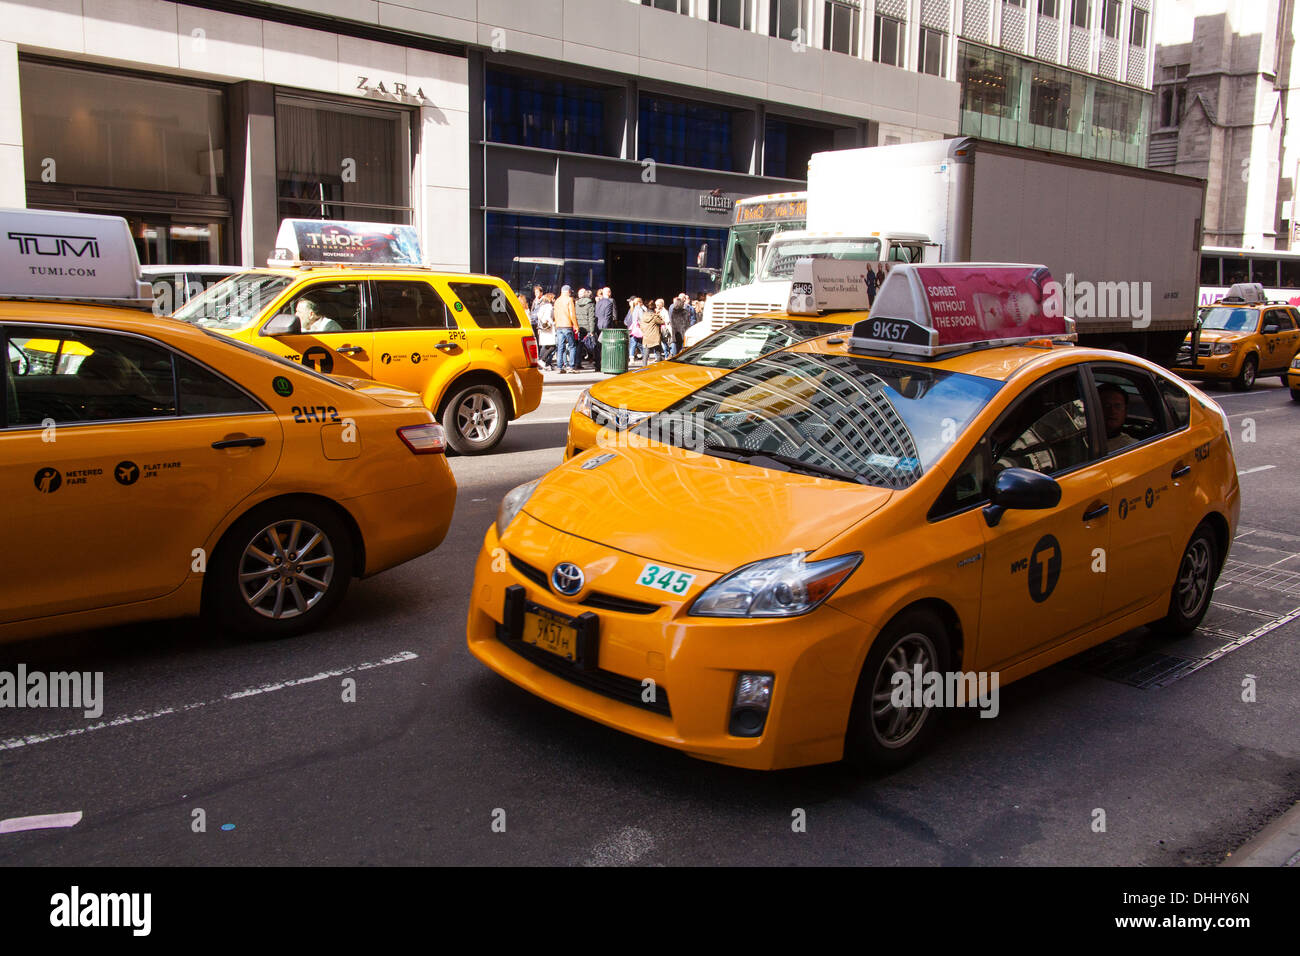 Yellow taxi cabs, Fifth Avenue, New York City, United States of America. Stock Photo